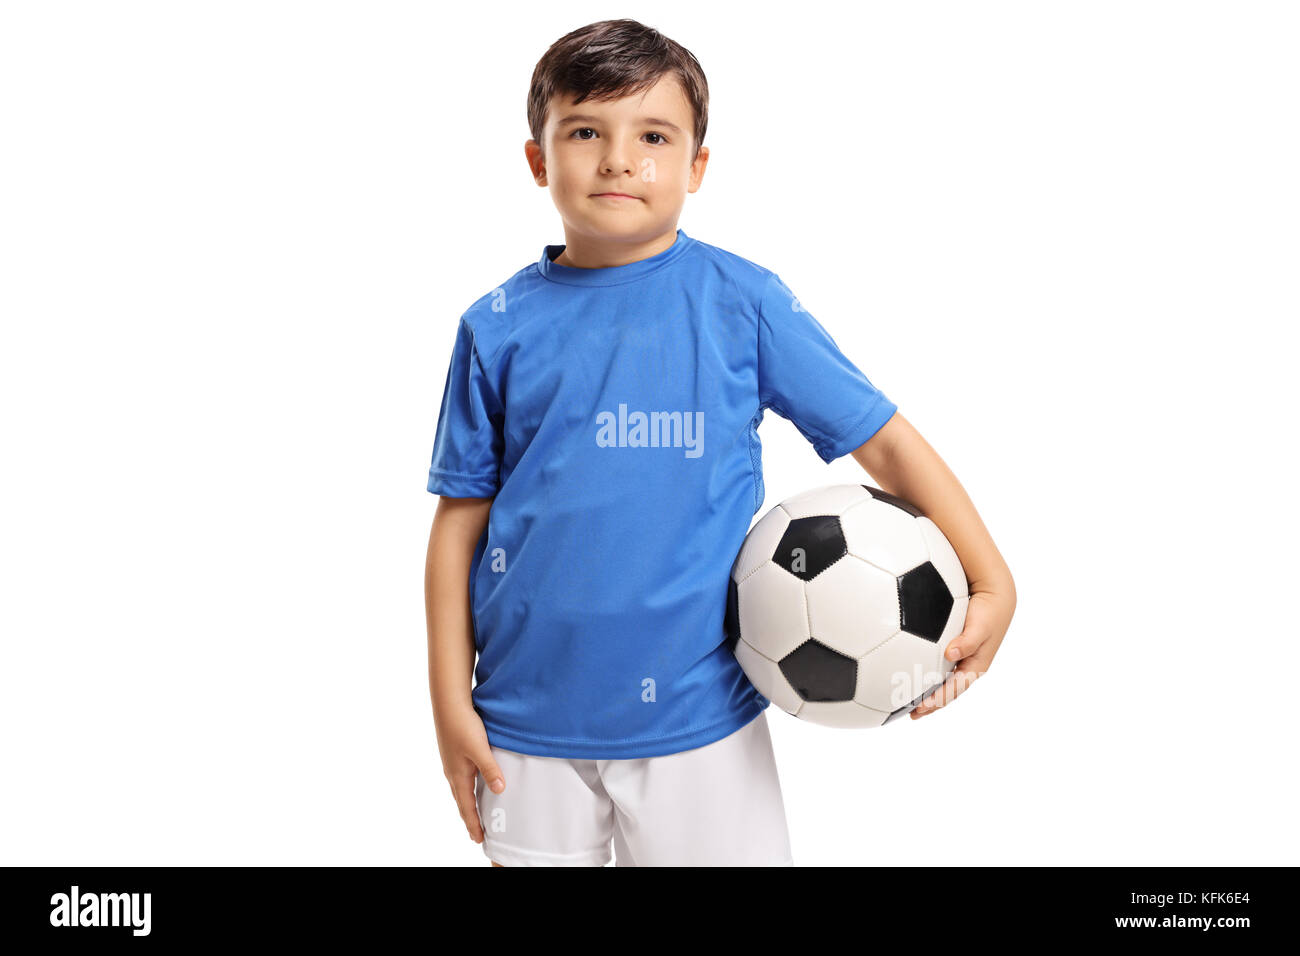 Little footballer looking at the camera isolated on white background Stock Photo